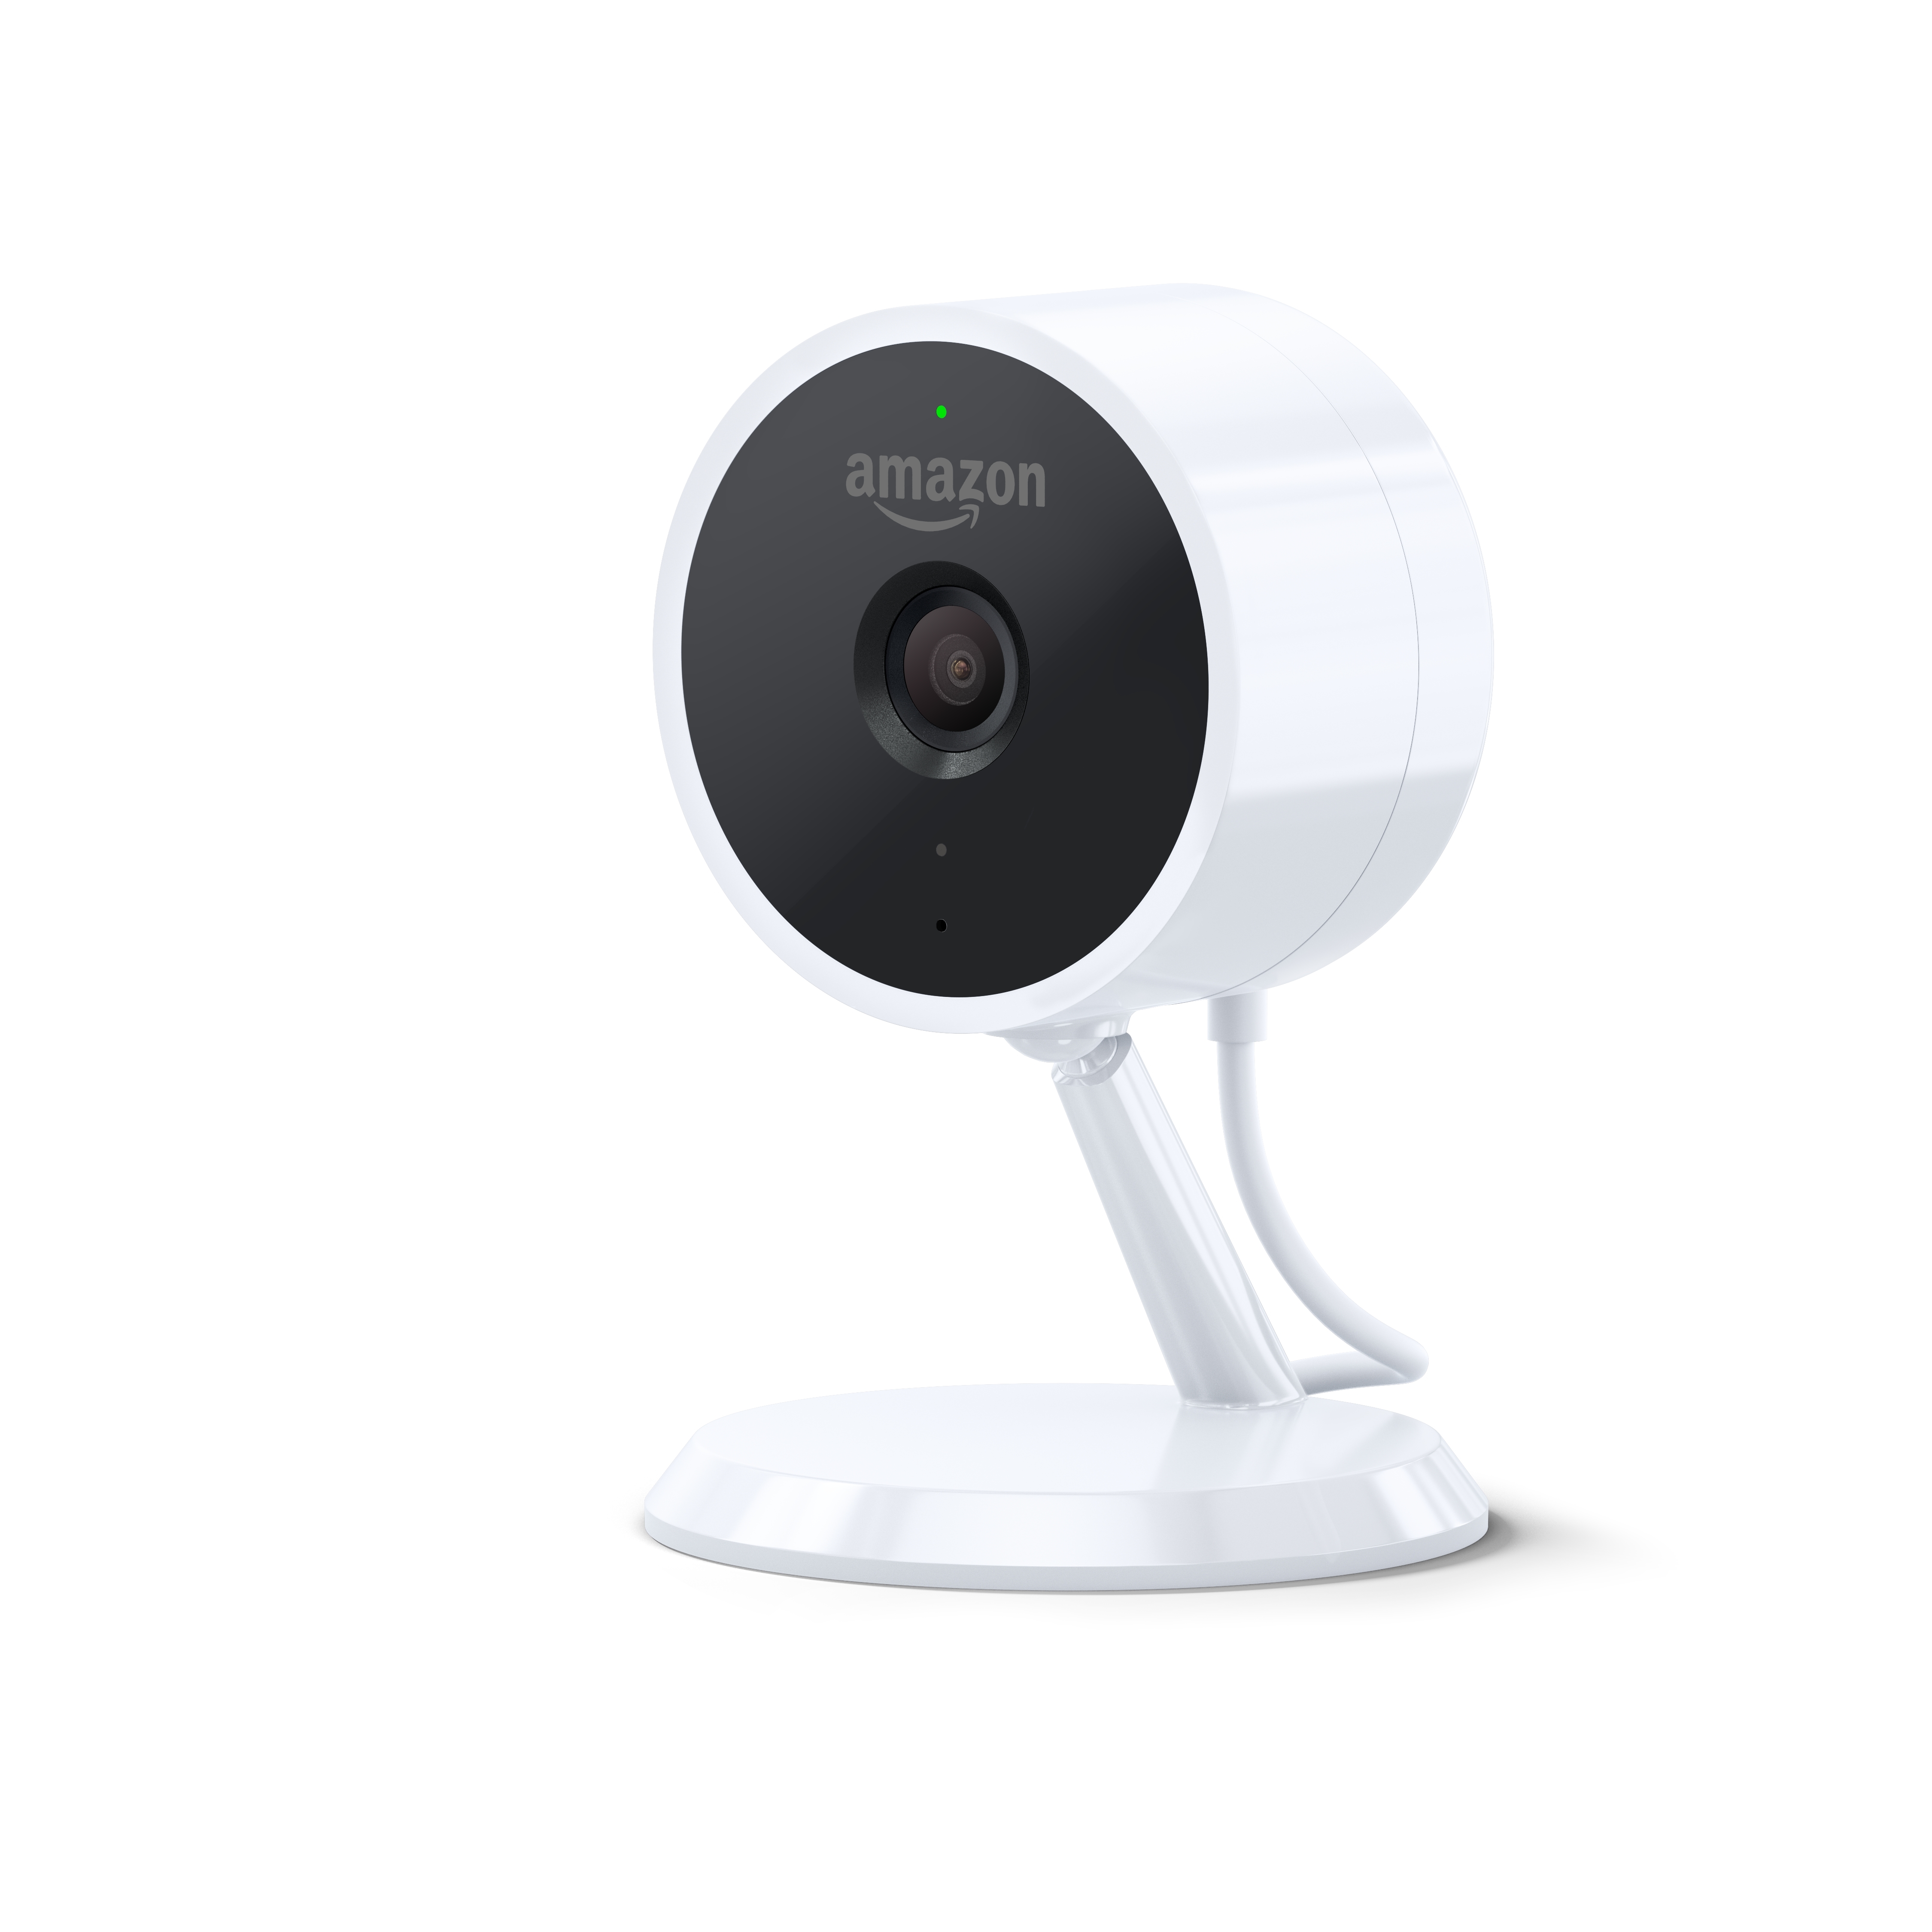 using amazon cloud cam as baby monitor